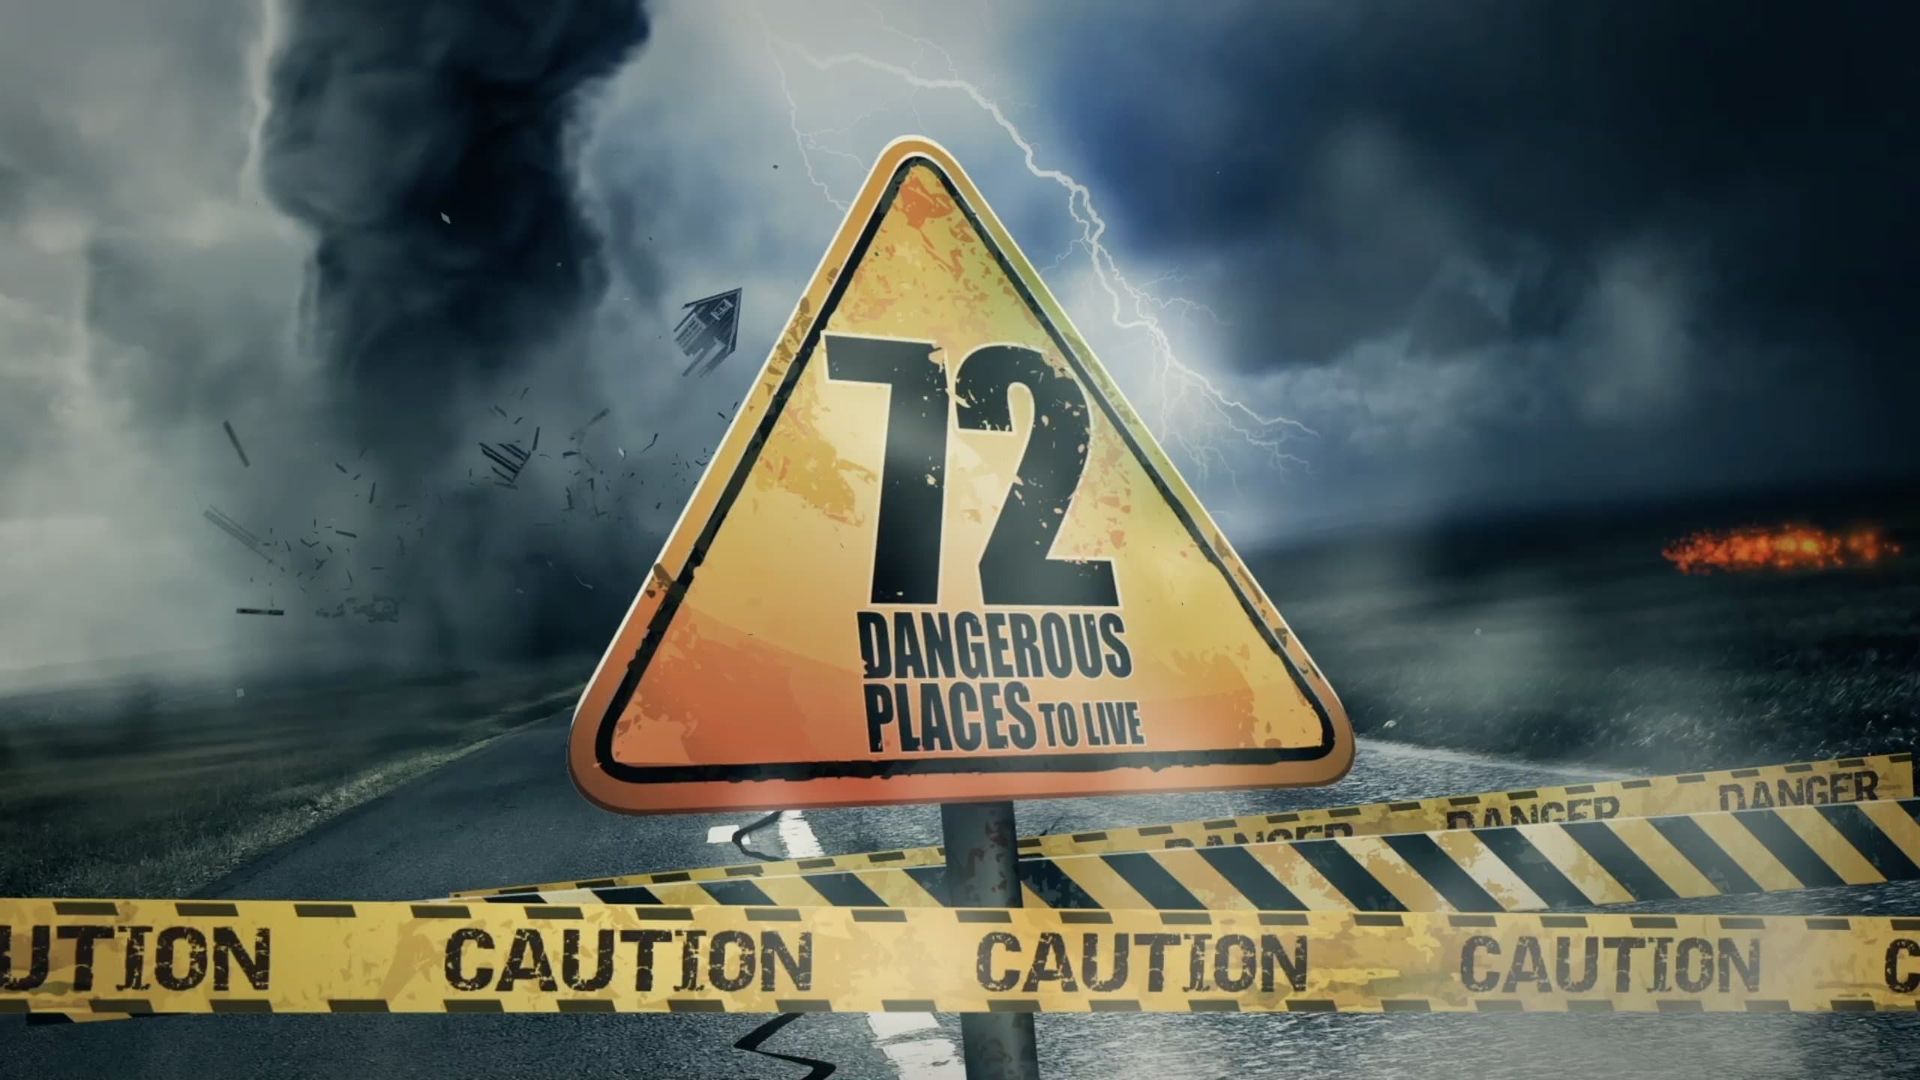 72 Dangerous Places to Live background